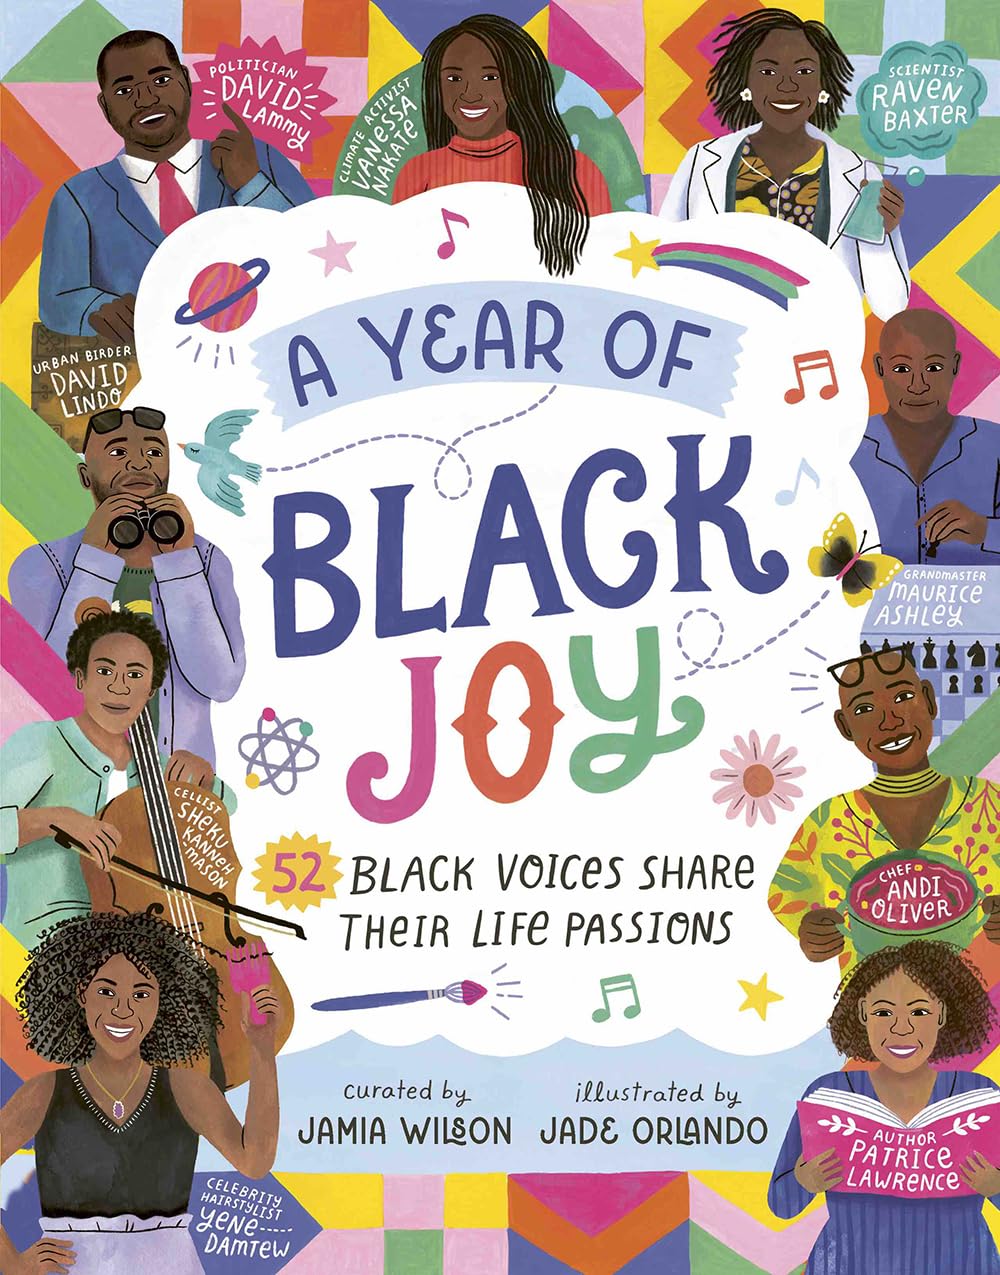 Cover of A Year of Black Joy: 52 Black Voices Share Their Life Passions by Jamia Wilson, illustrated by Jade Orlando